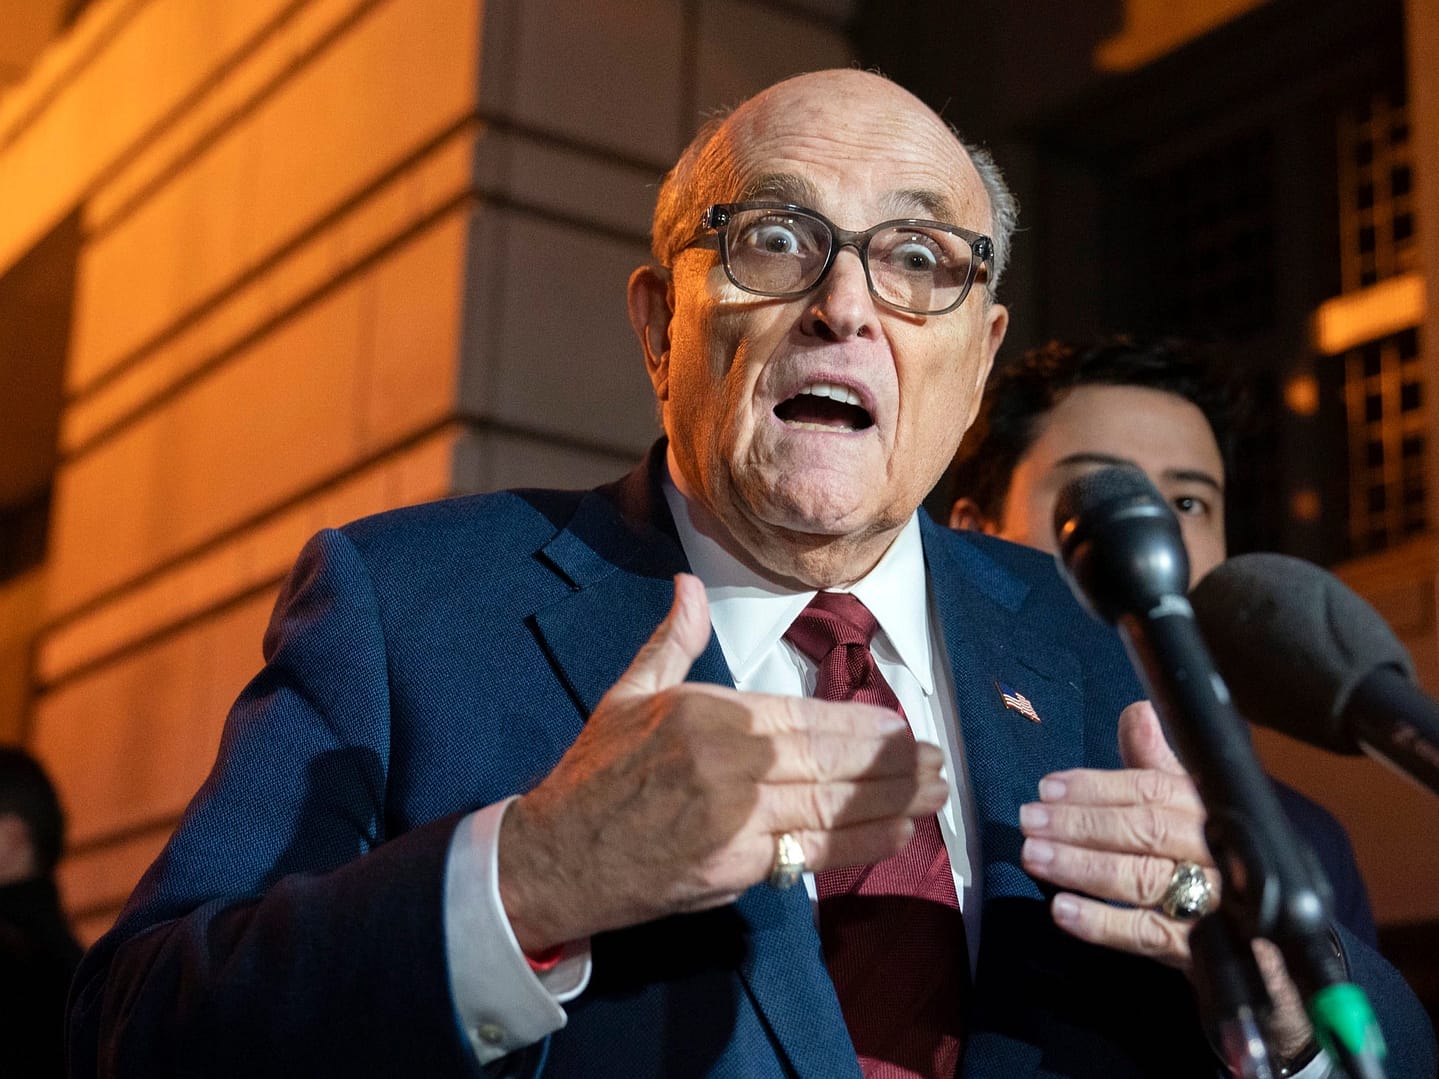 rudy-giuliani-creditors-come-together-for-the-embattled-former-mayor’s-first-bankruptcy-hearing